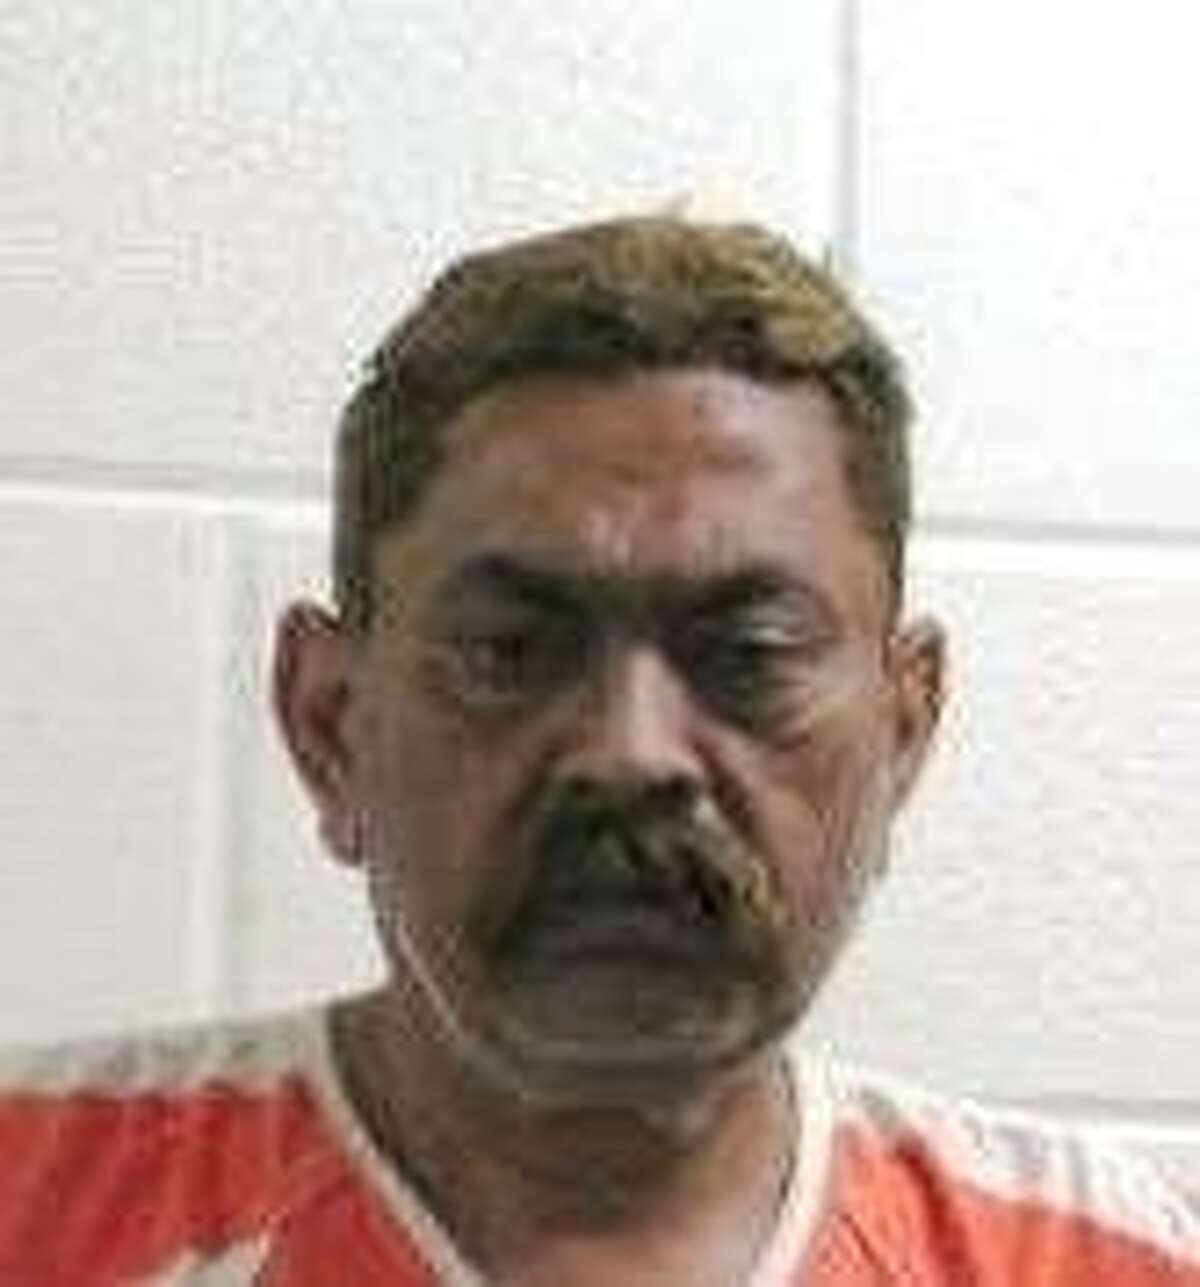 Shahid Malik, 60, was arrested on April 3 for bond surrender for indecency with child. Malik was originally arrested for indecency with a child on March 26, but bonded out. Malik was reportedly inquiring about how to renew his passport, therefore was considered to be a flight risk. The Jail Division of the San Jacinto County Sheriff’s Office reported 25 arrests from Monday, April 2, through Sunday, April 8, 2012. All persons are innocent until proven guilty in a court of law.